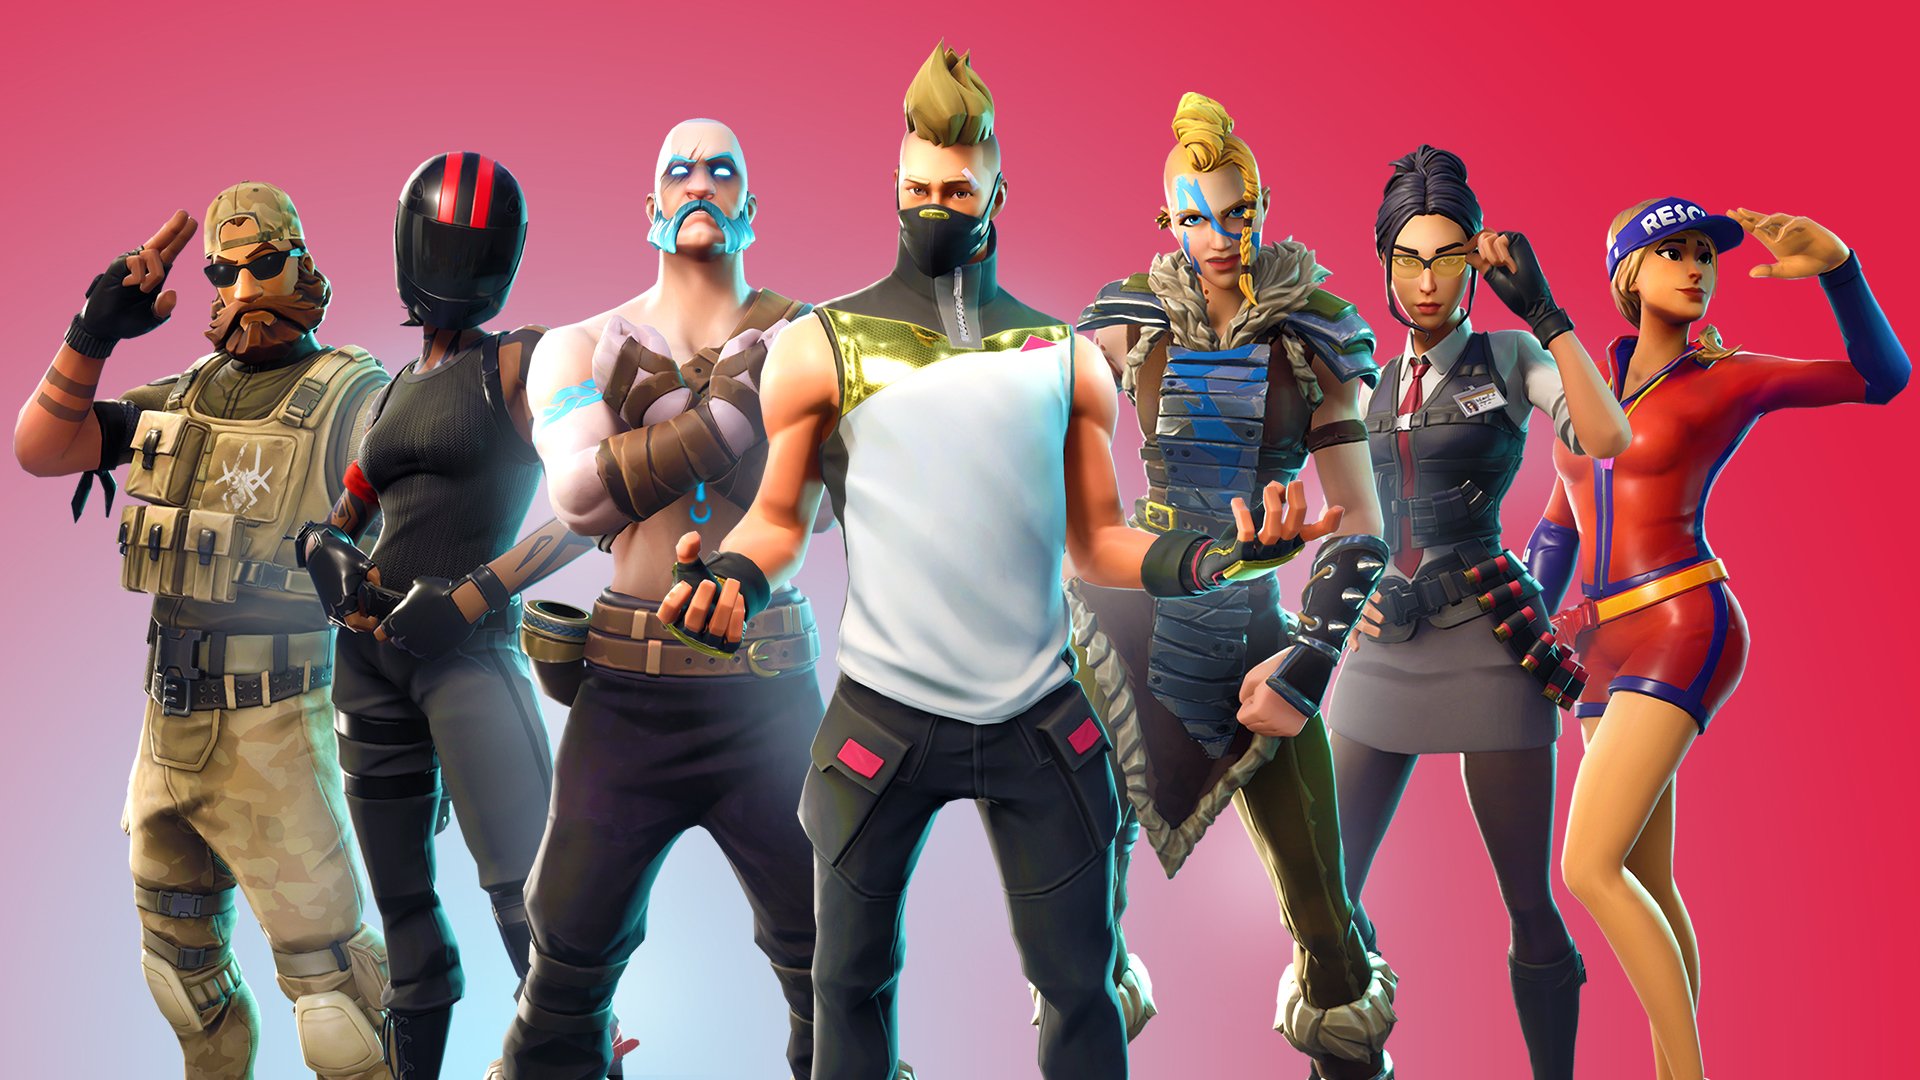 When is Fortnite Android going to be released, will it be on Google Play  and does it have crossplay with PS4, Switch or Xbox One?